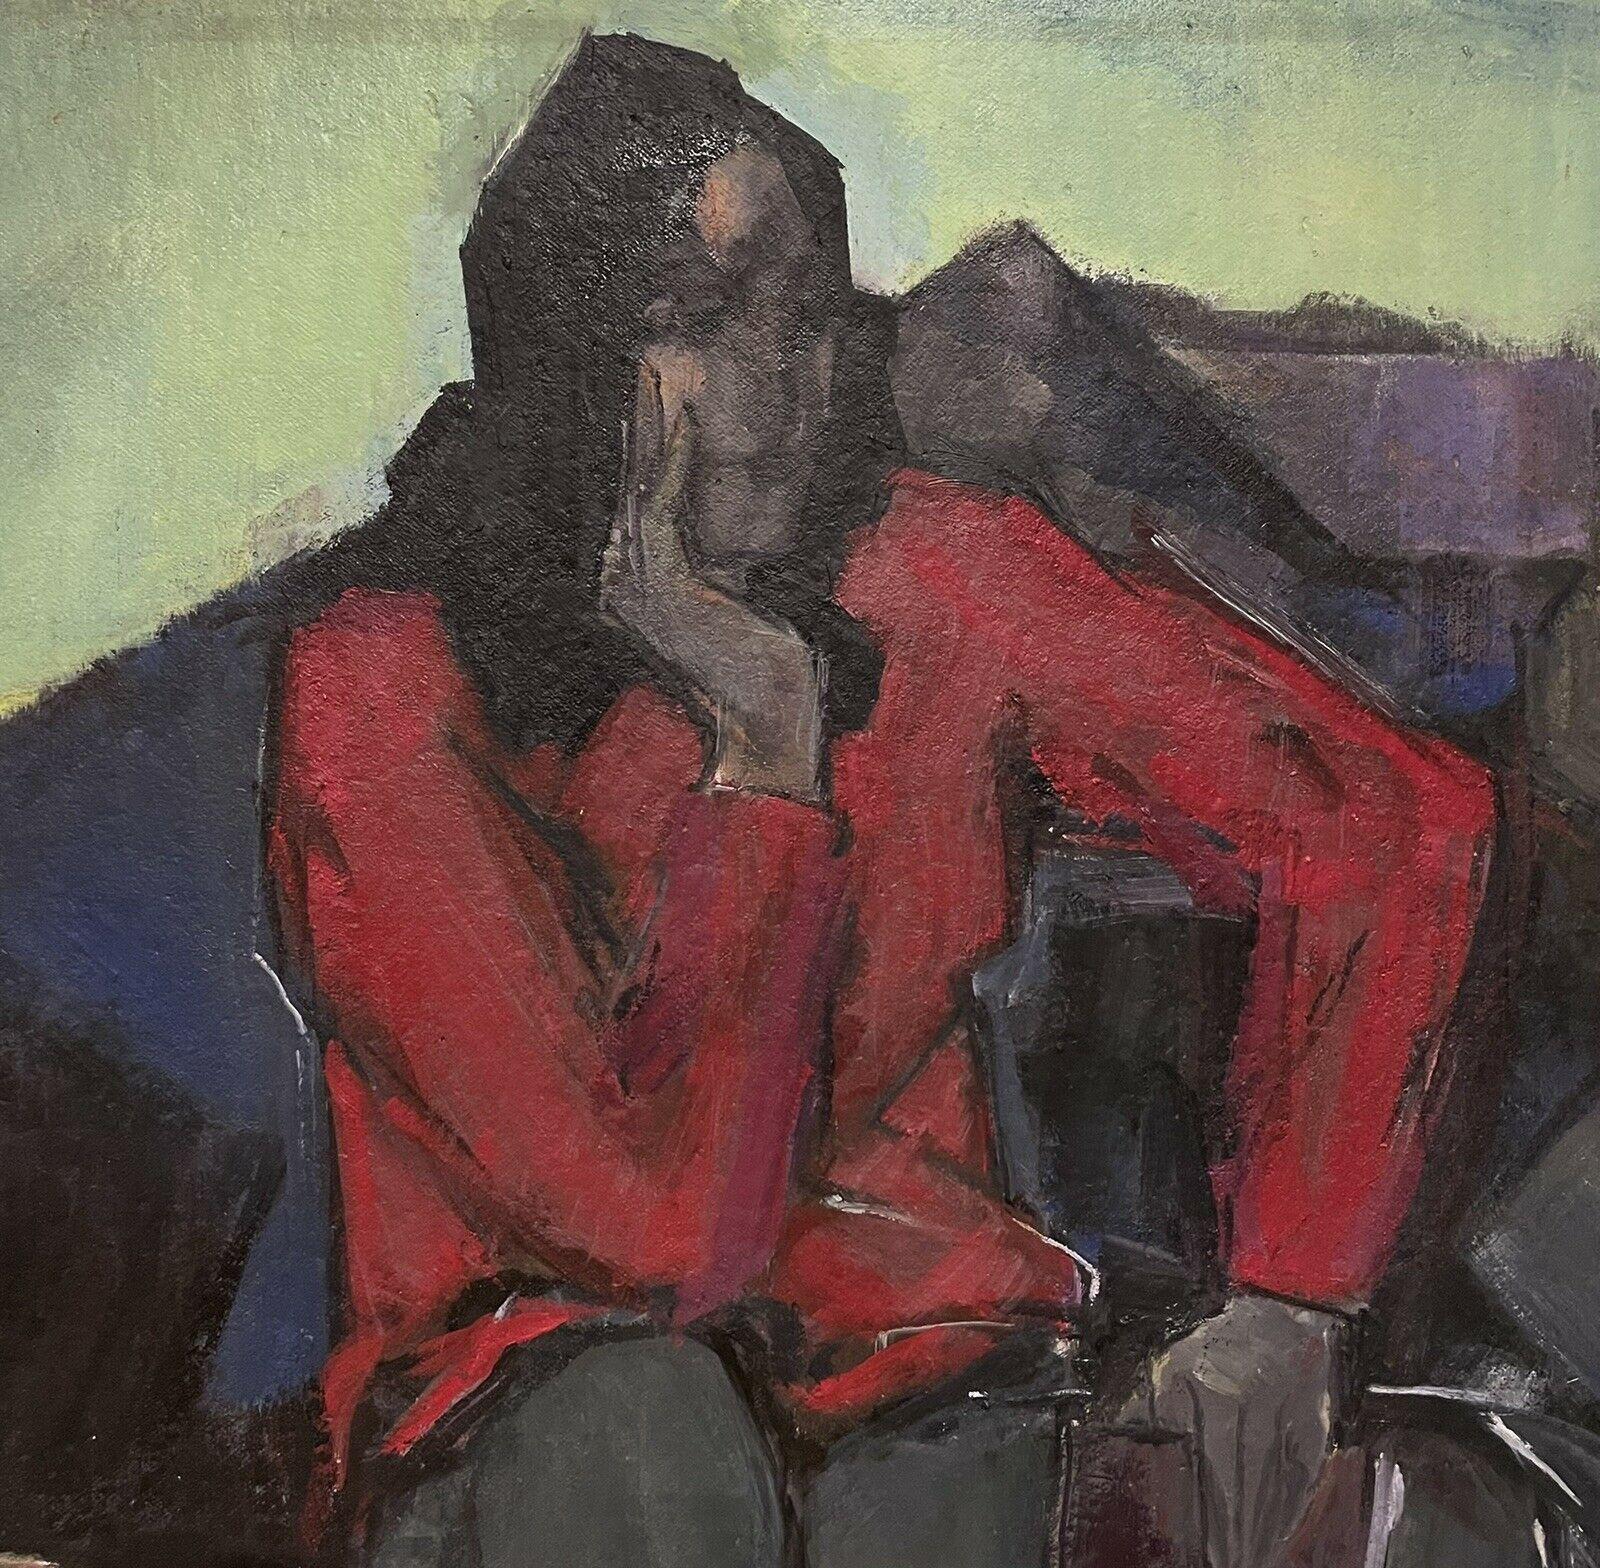 Artist/ School: French School, signed and dated 1960's

Title: Interior scene with a figure in red jacket

Medium: oil painting on board, framed.

framed:  41.75 x 33.75 inches
painting: 39.5 x 31.5 inches

Provenance: private collection,